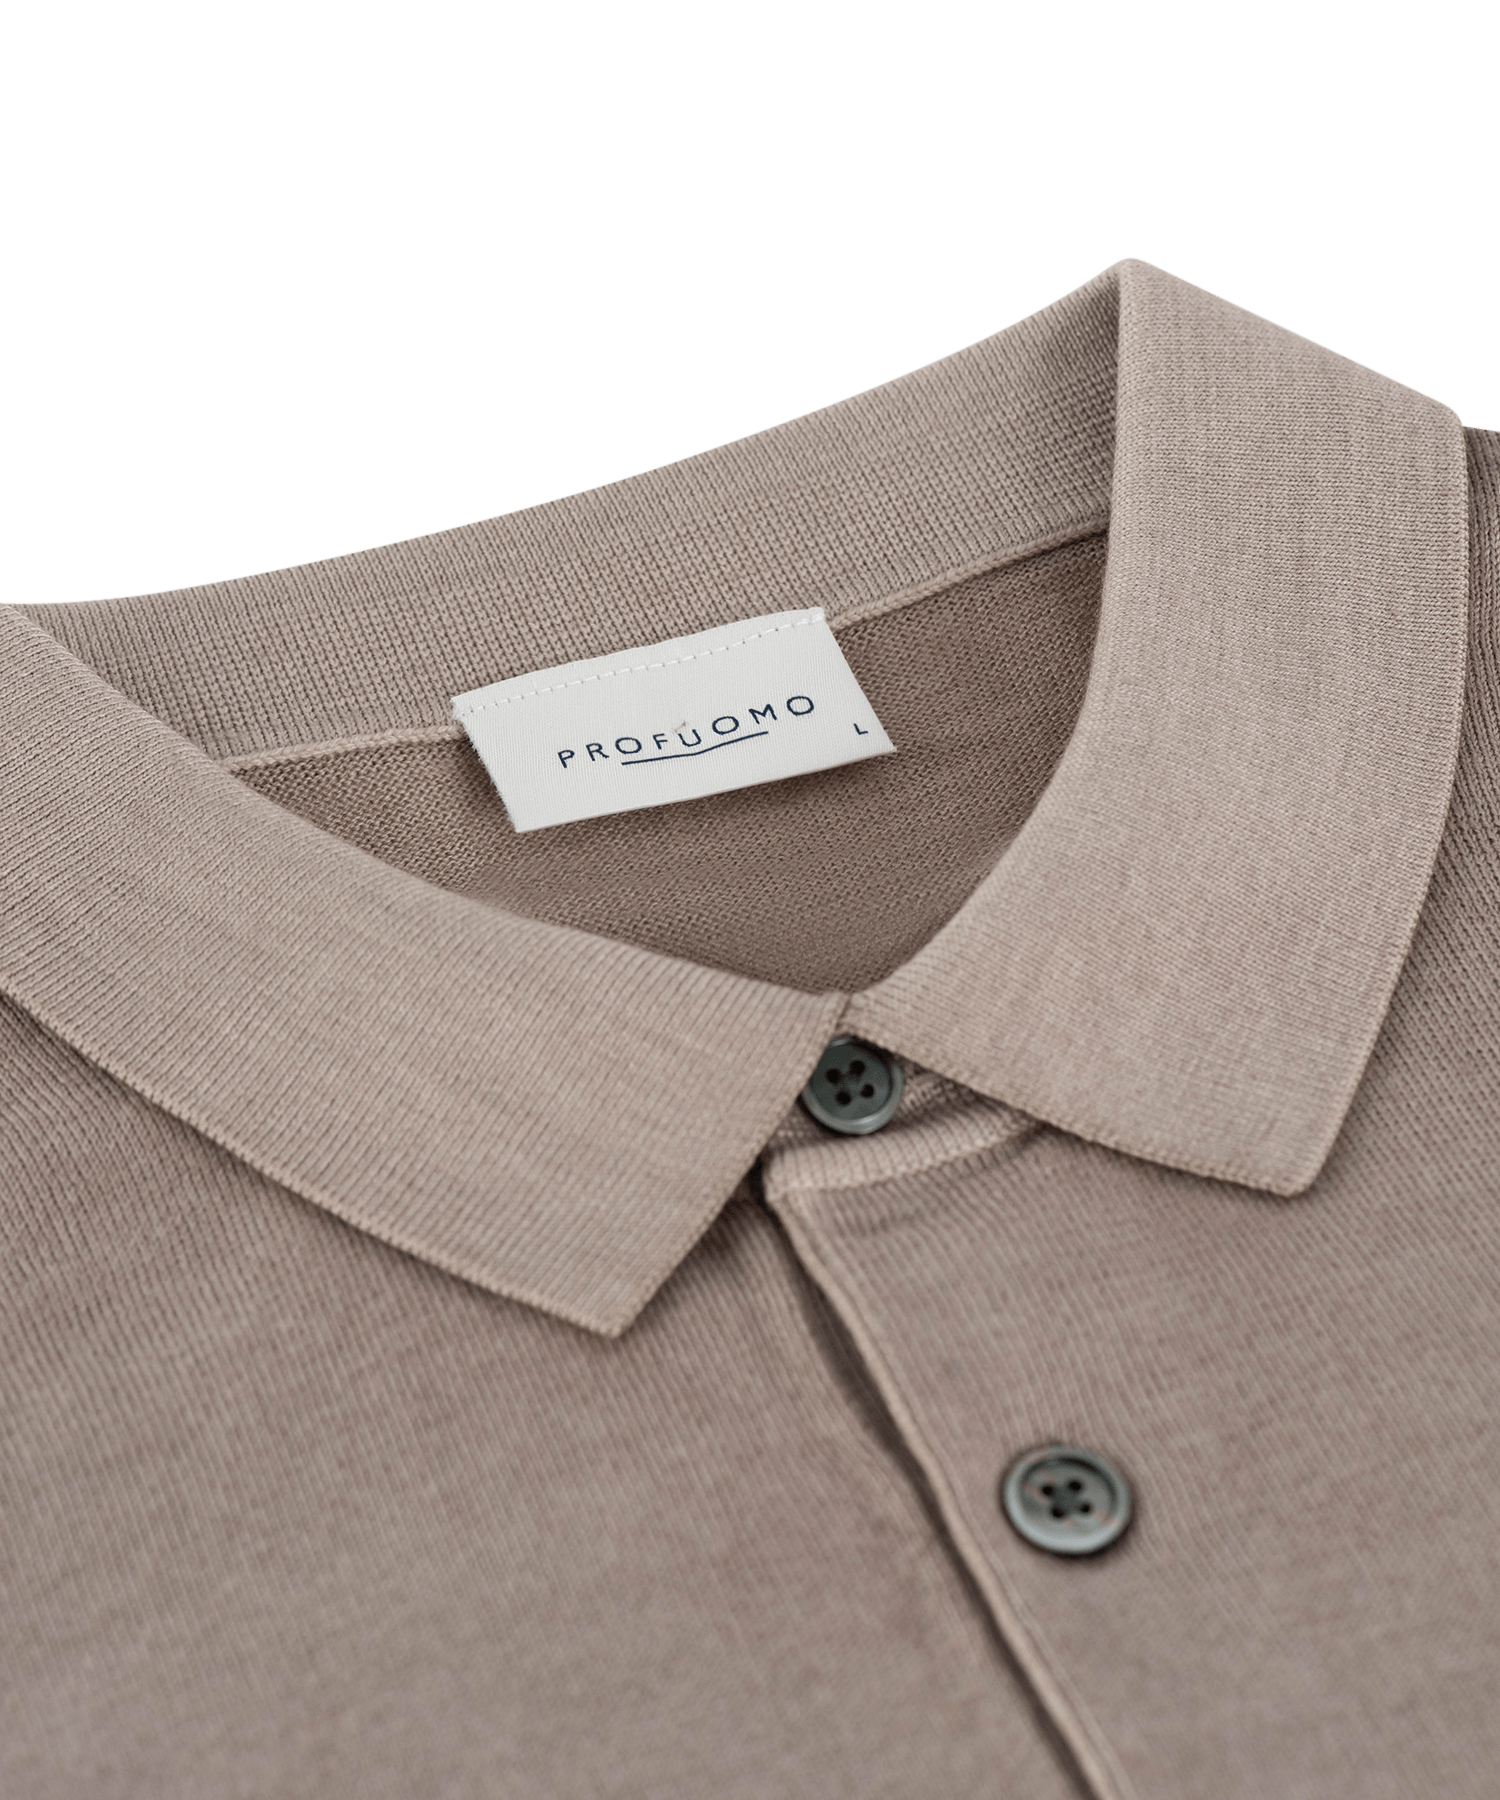 POLO LS TAUPE L / Beige / taupe